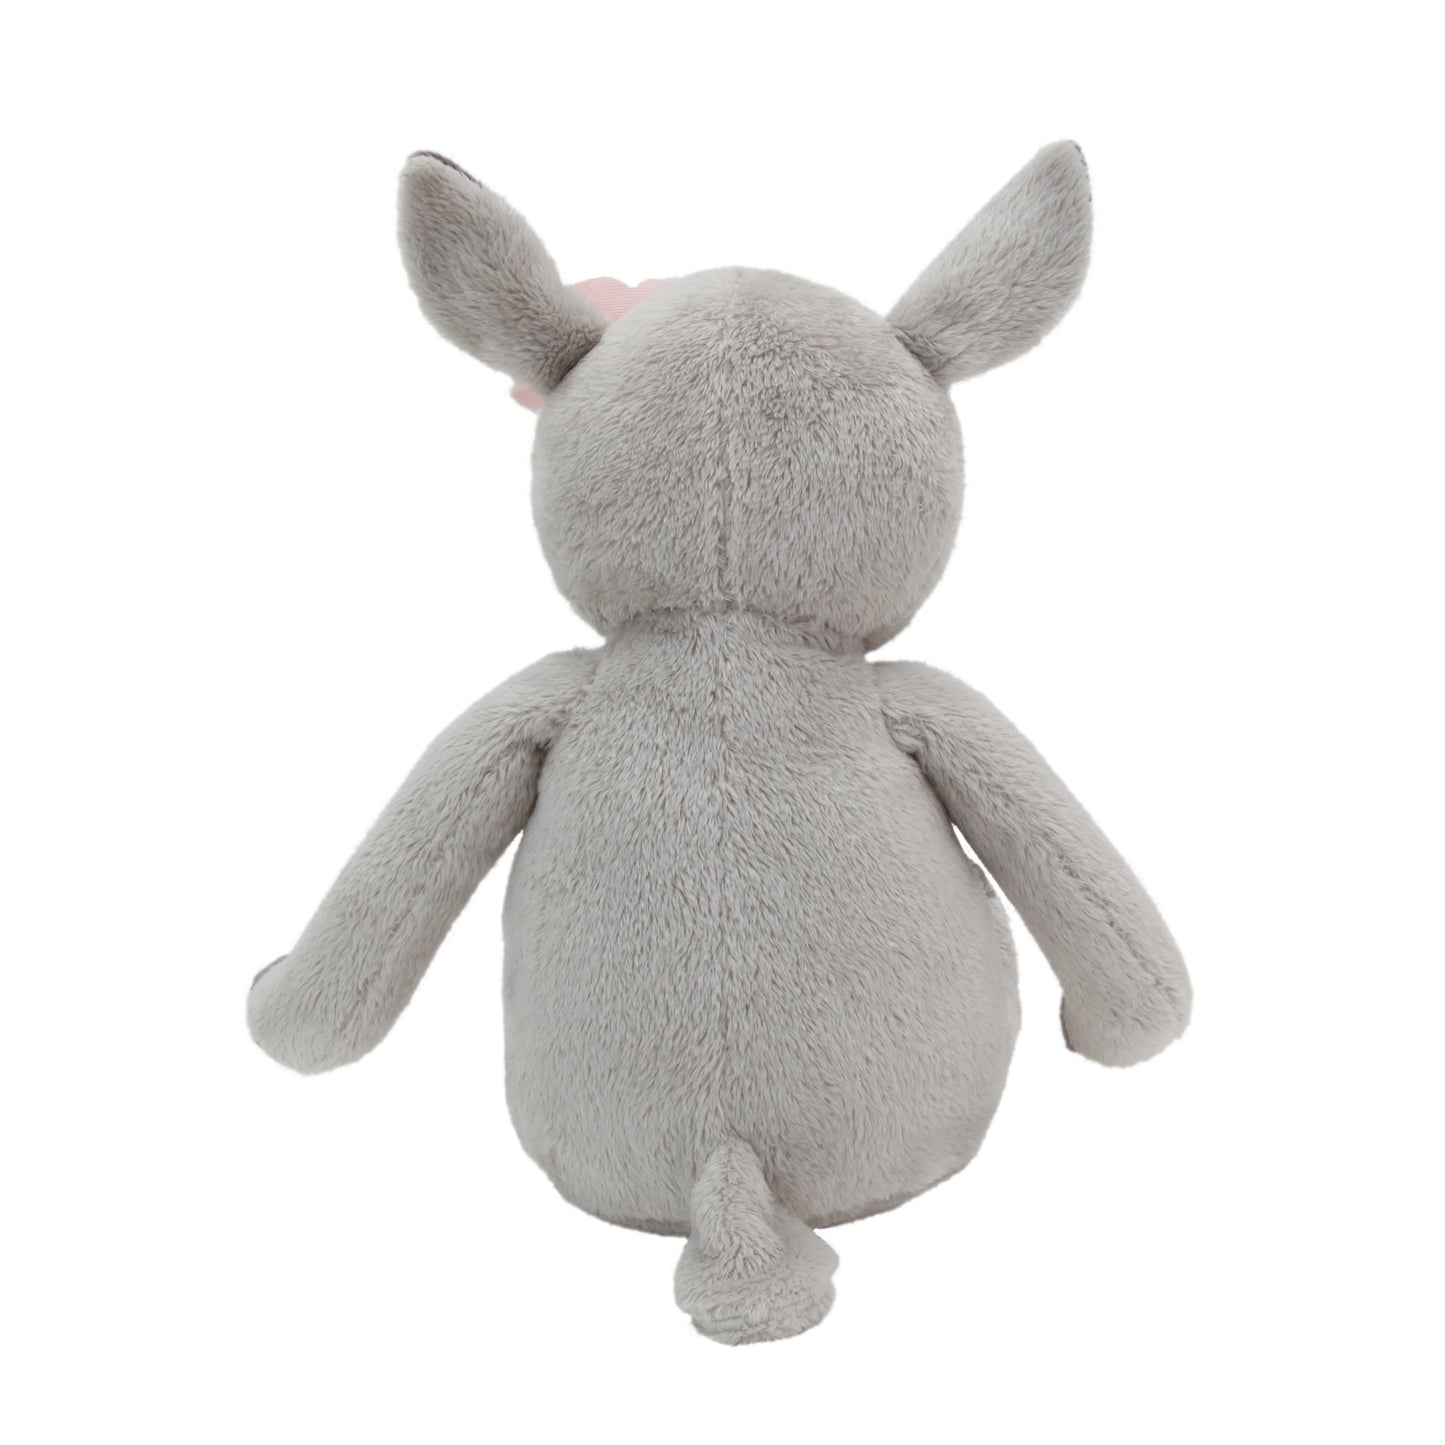 Little Love by NoJo Lucy the Grey and White Plush Deer with Pink Rose